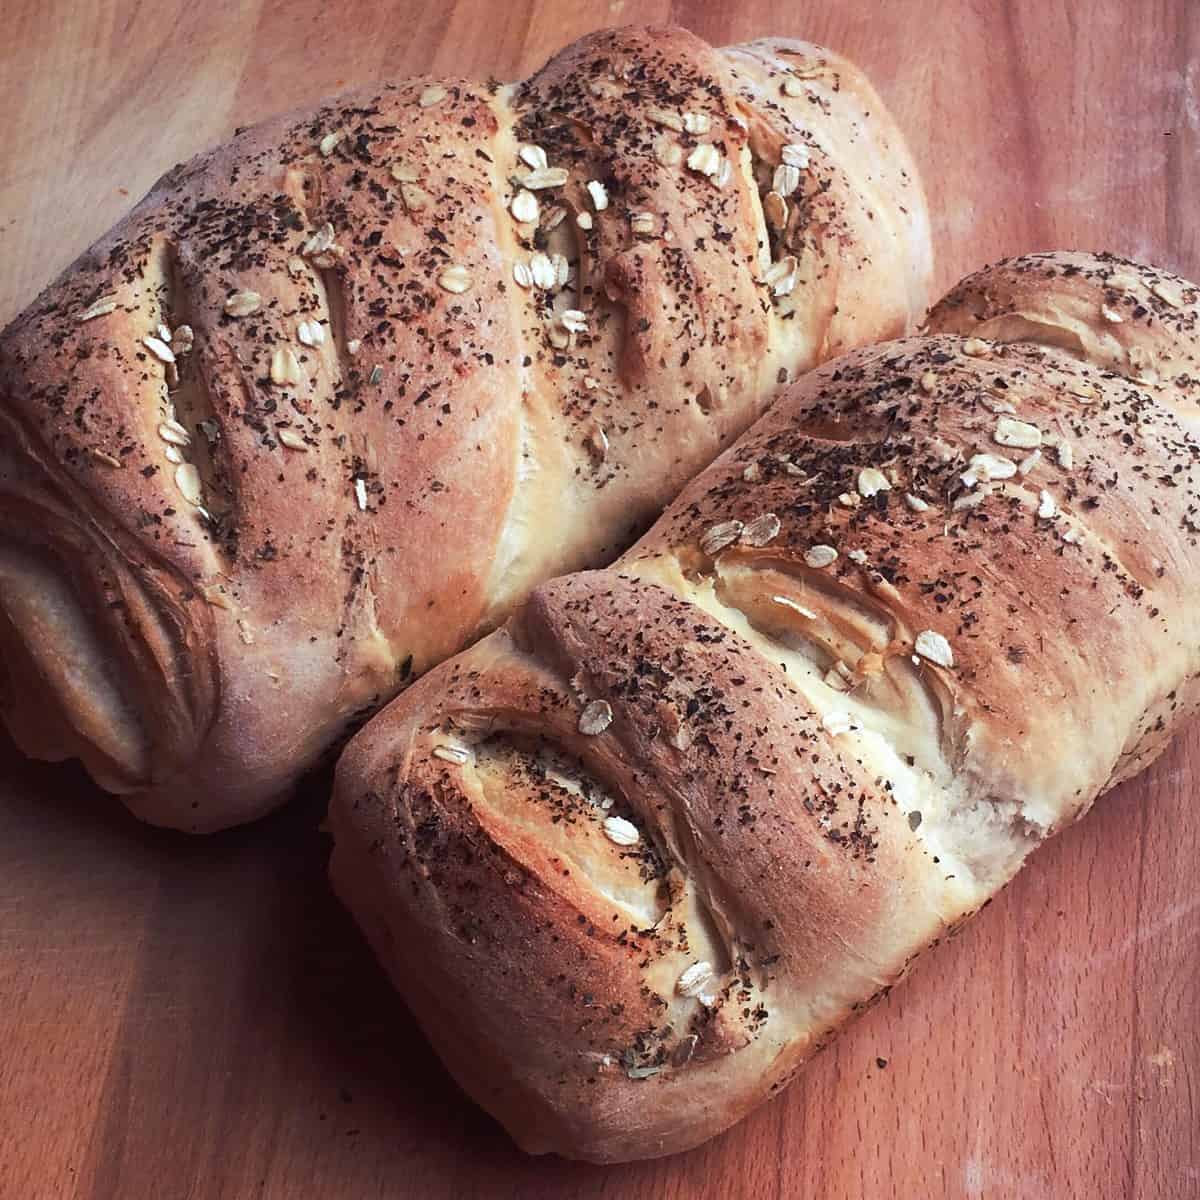  Not just any bread - this vegan loaf is filled with love